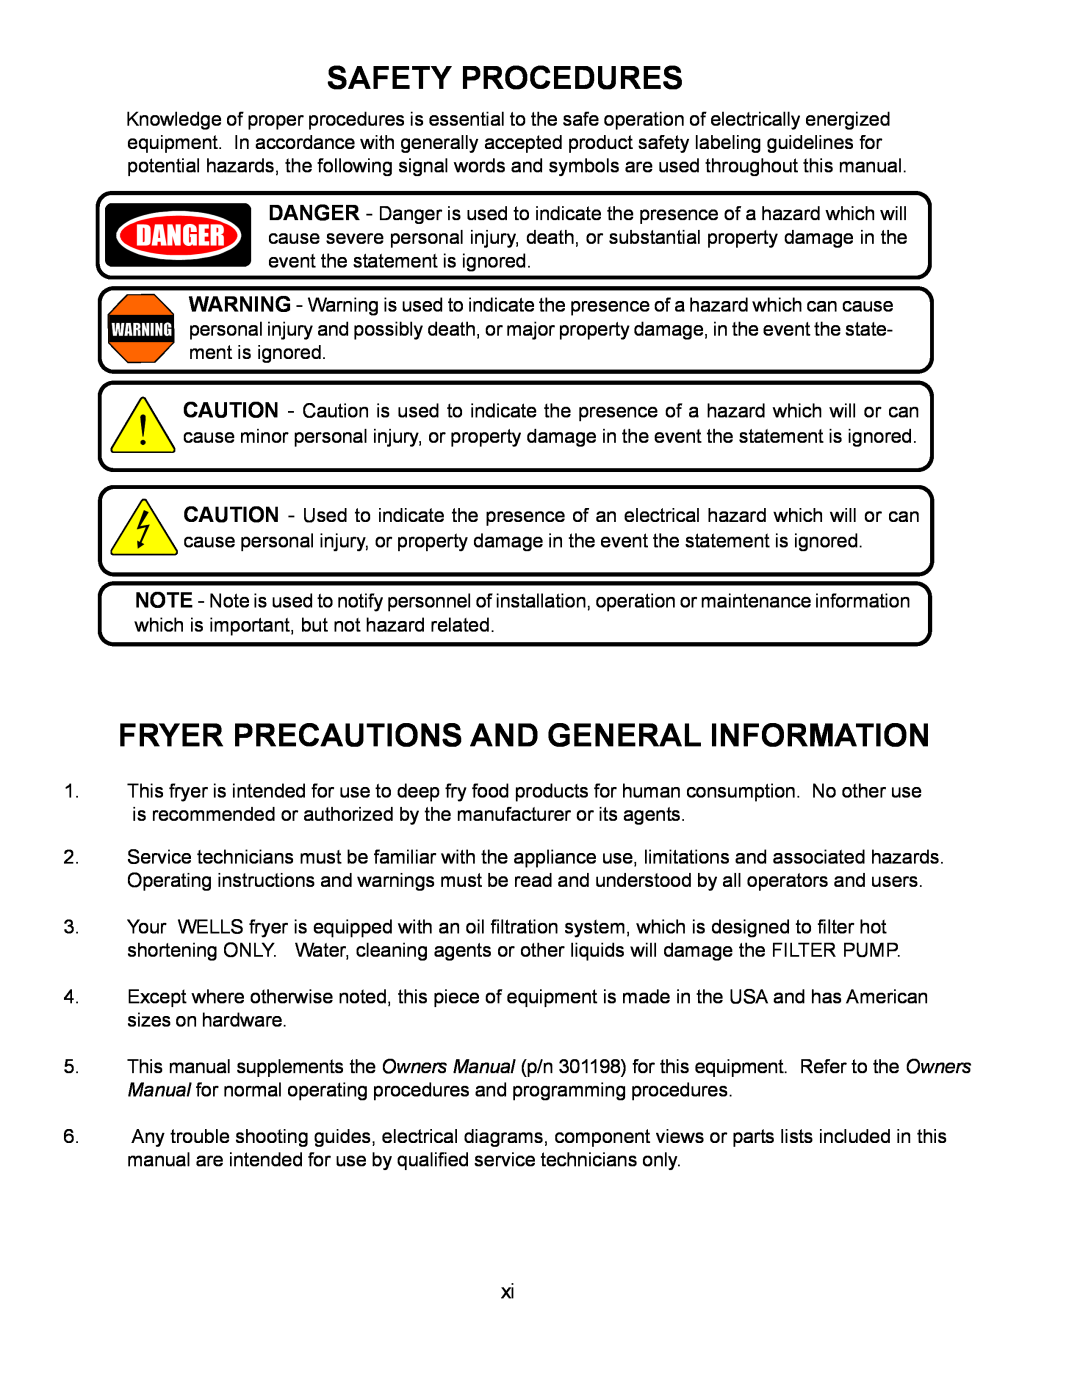 Wells WFGA-60FS service manual Safety Procedures, Fryer Precautions And General Information 